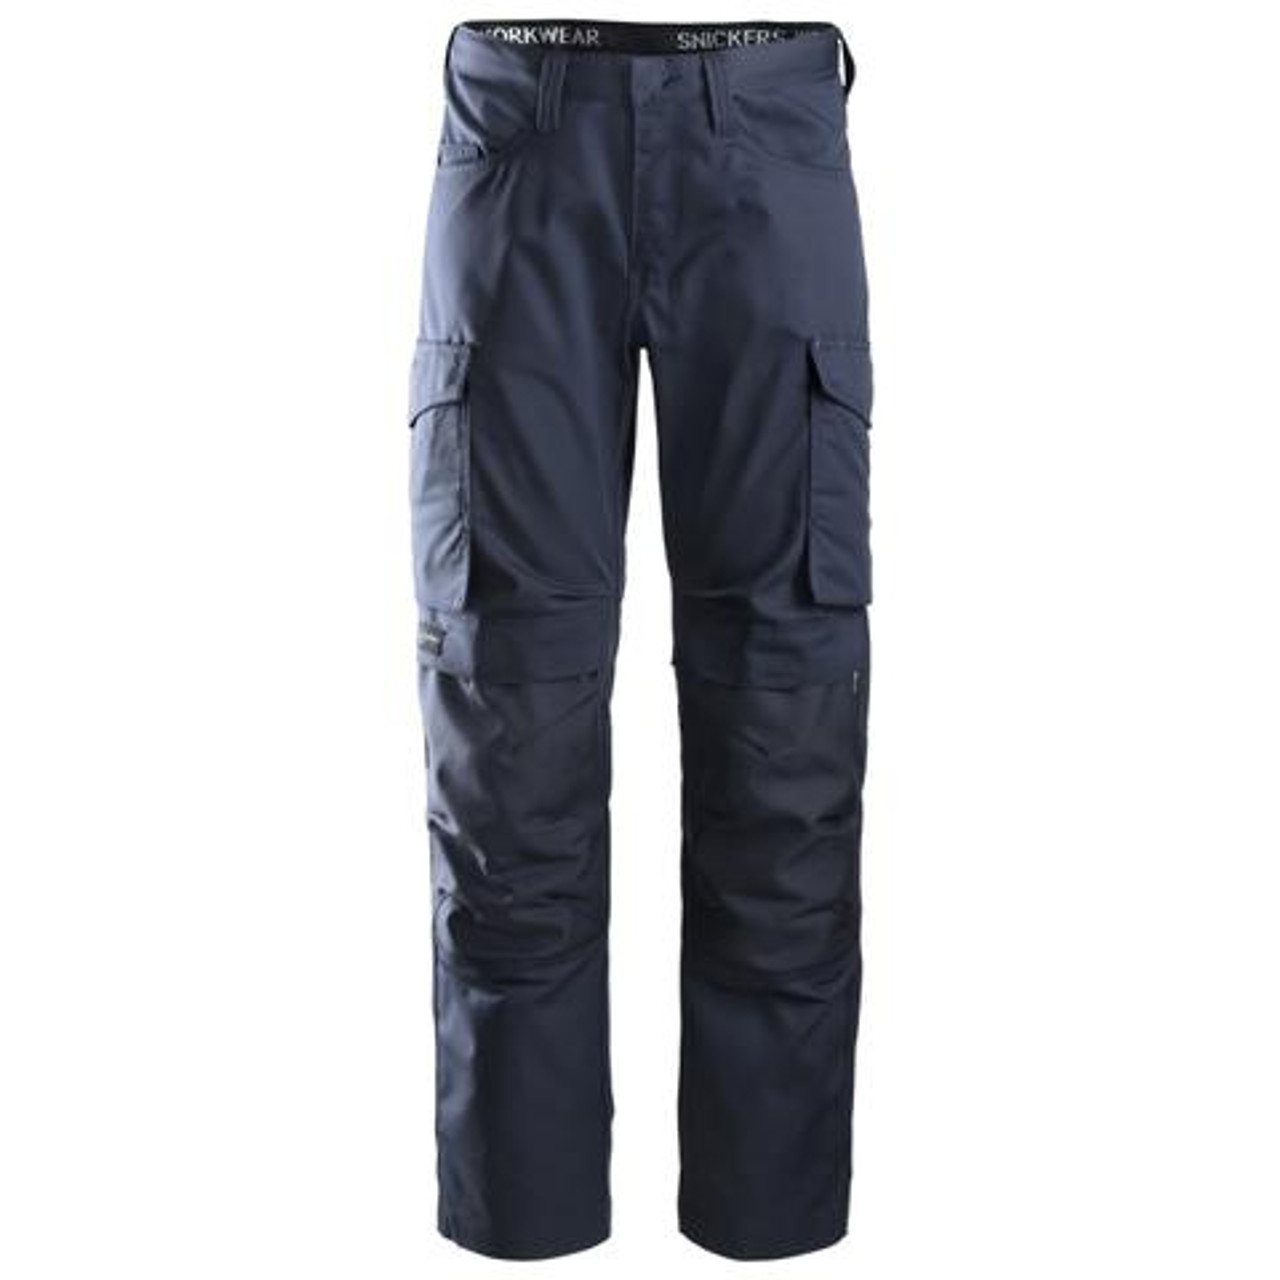 SNICKERS Trousers 6801 with Kneepad Pockets  for Electricians that have Scratch Free  available in Australia, New Zealand and Canada